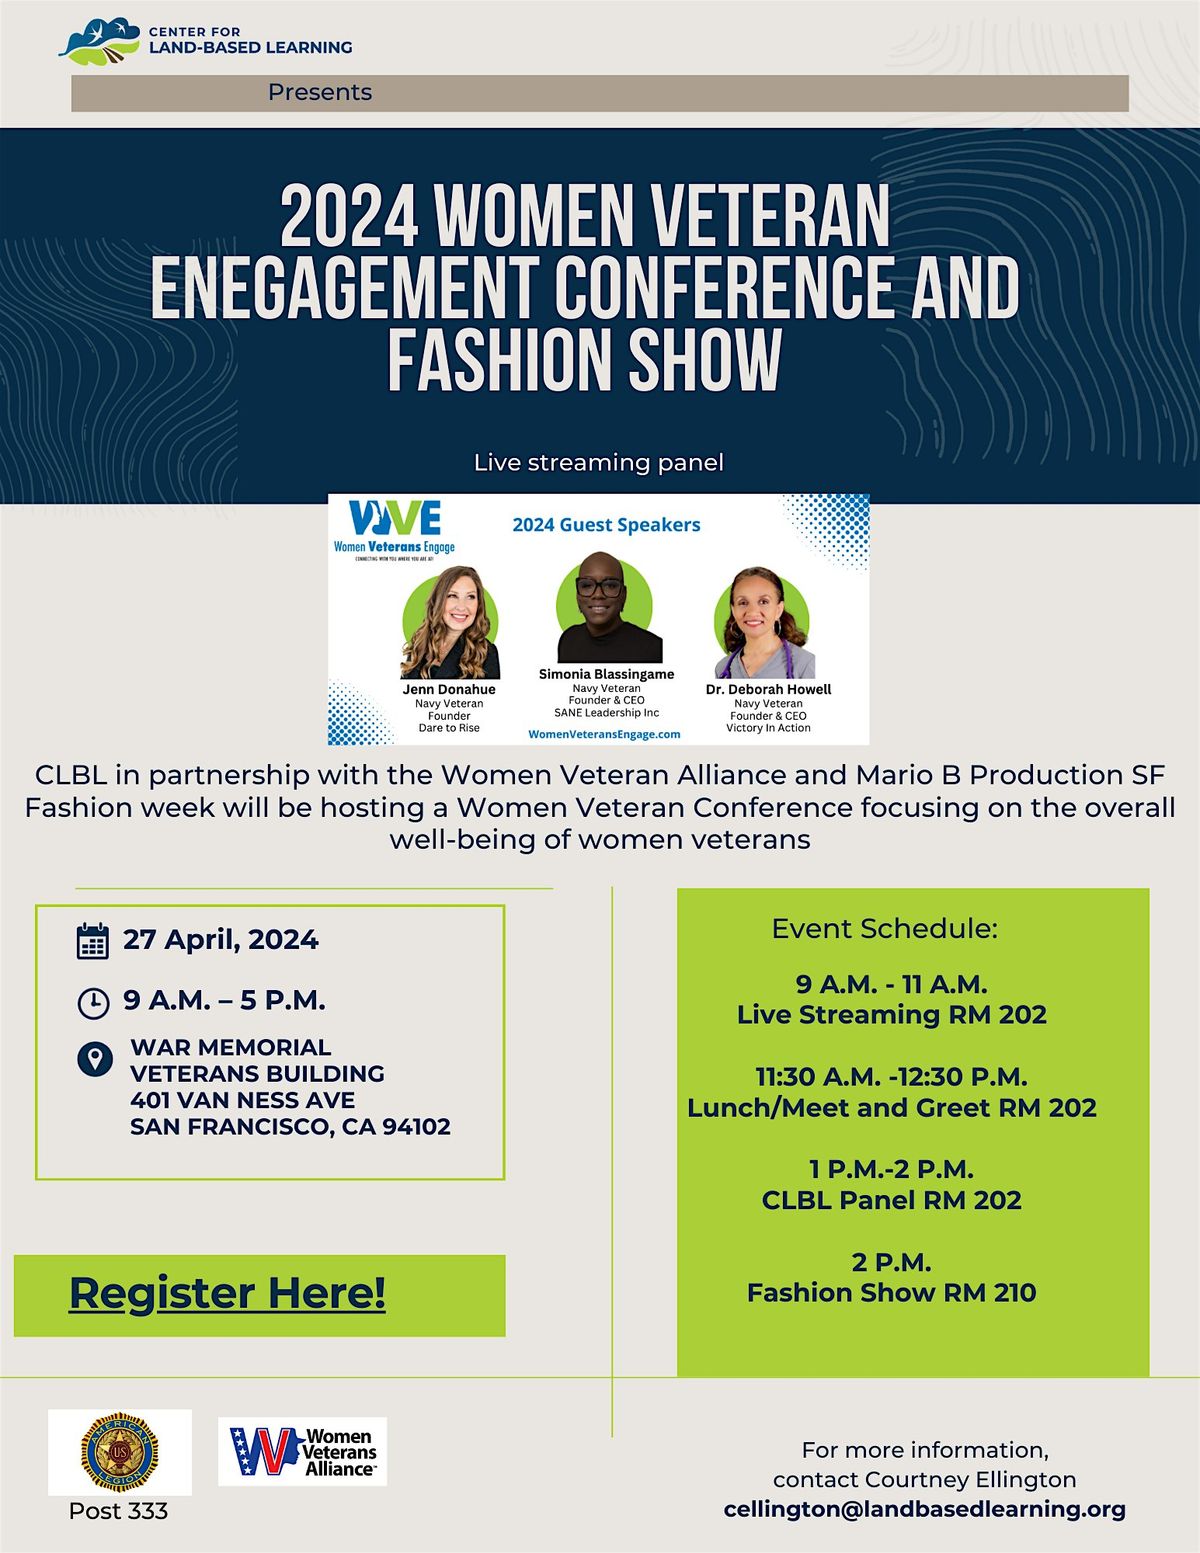 2024 Women Veteran Engagement Conference and Summer in Paris Fashion Show